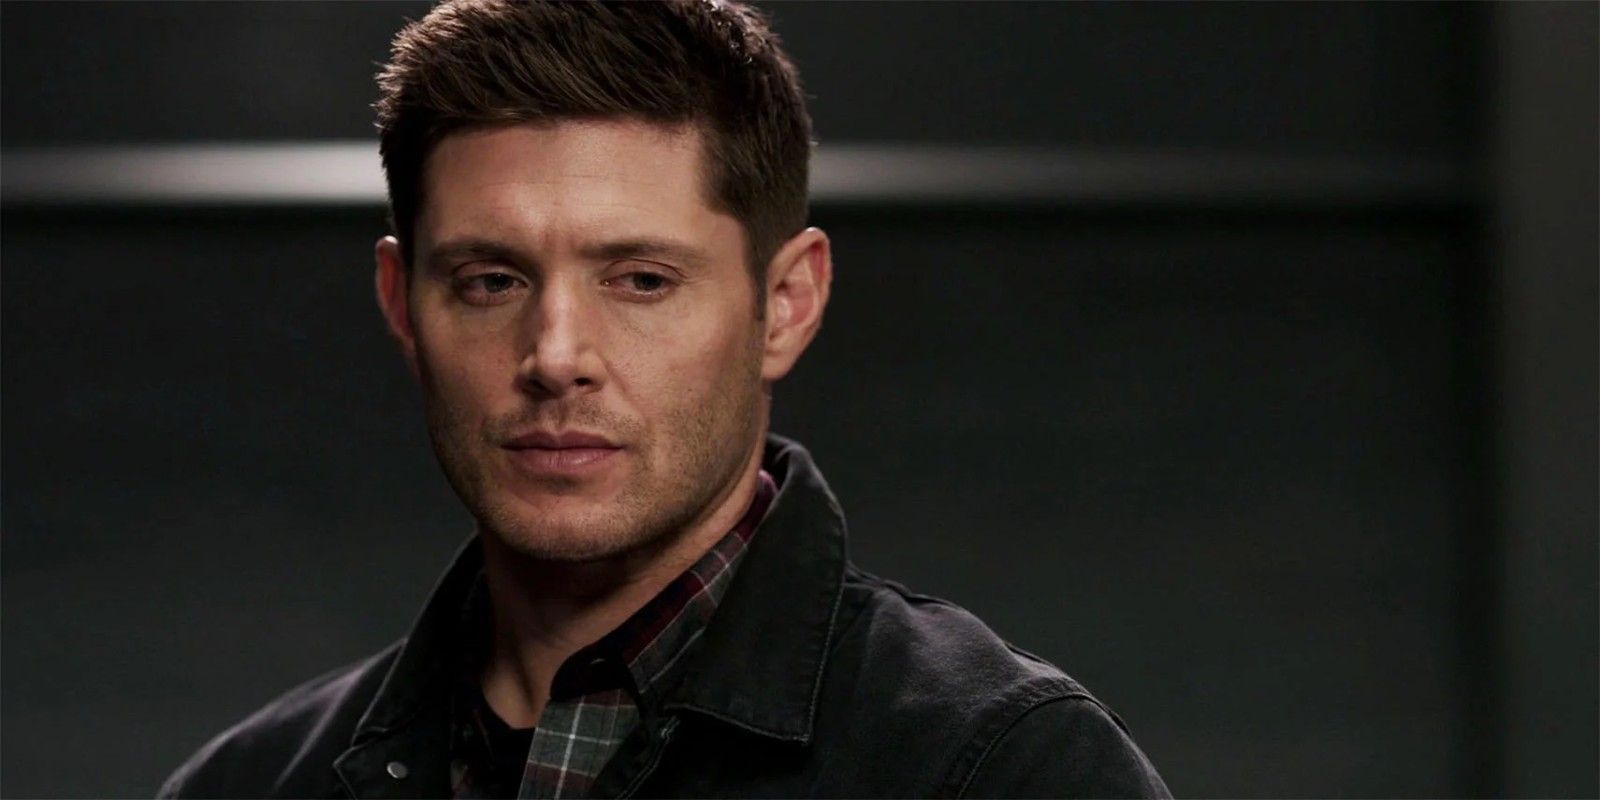 Dean Winchester looking troubled